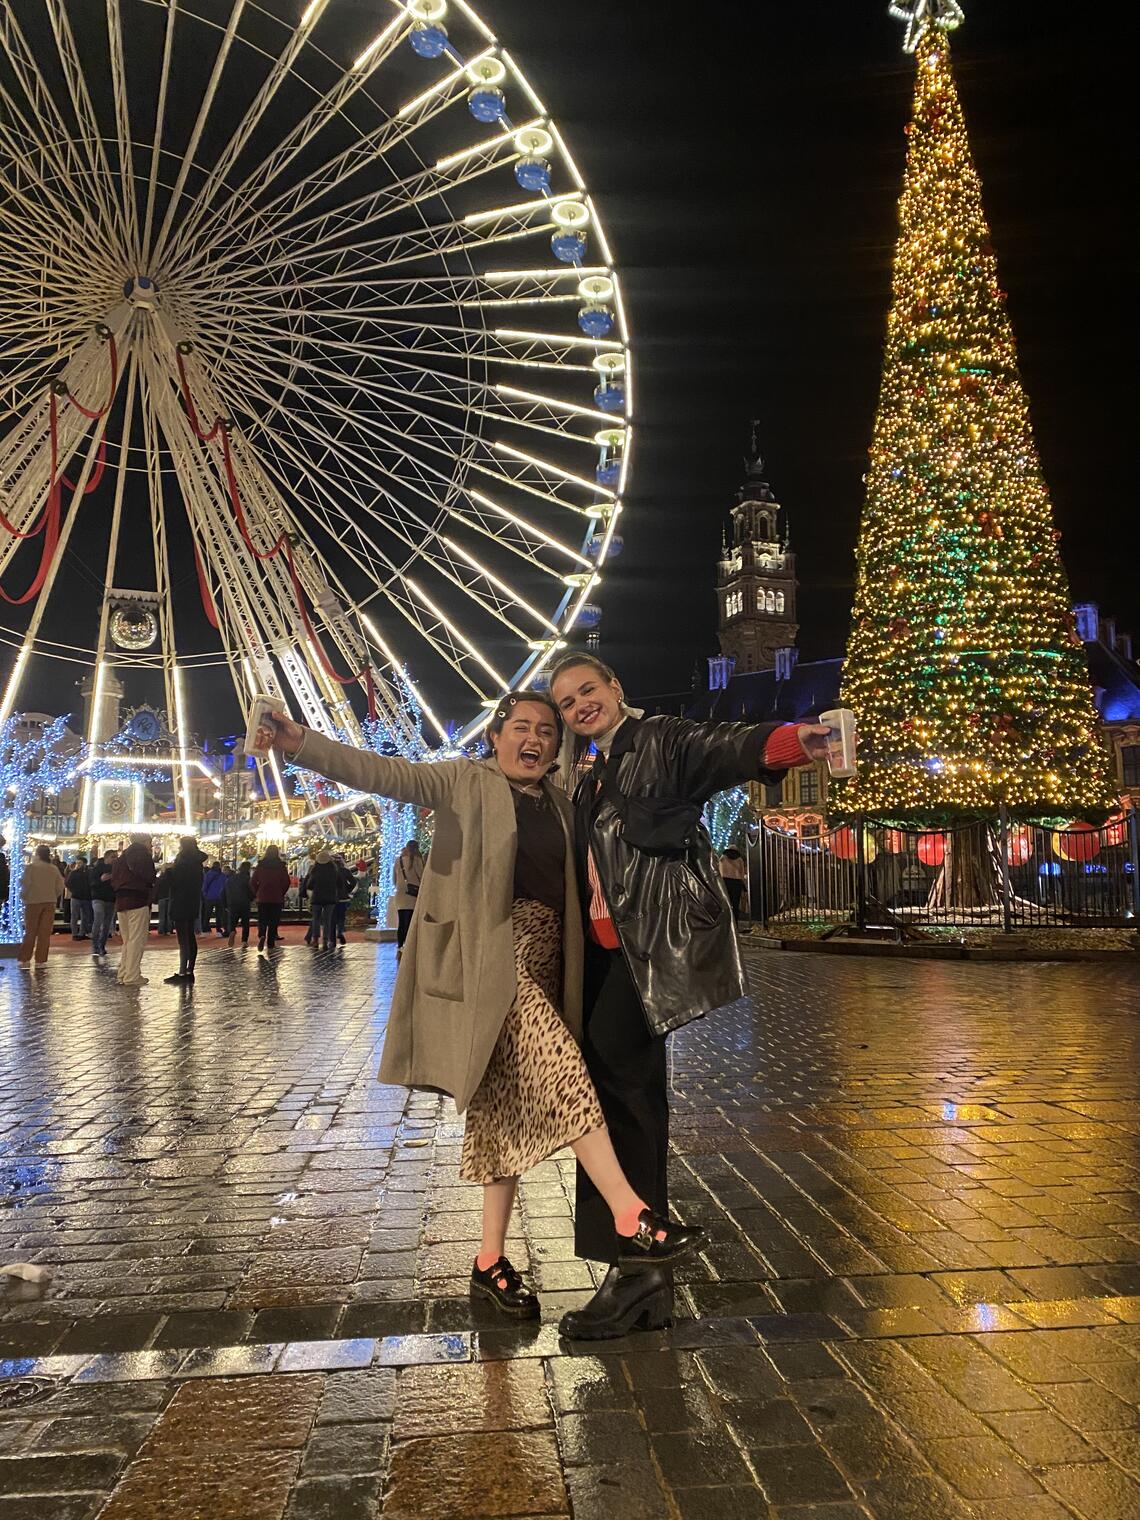 Me and my friend Maria at the Christmas Market in Lille